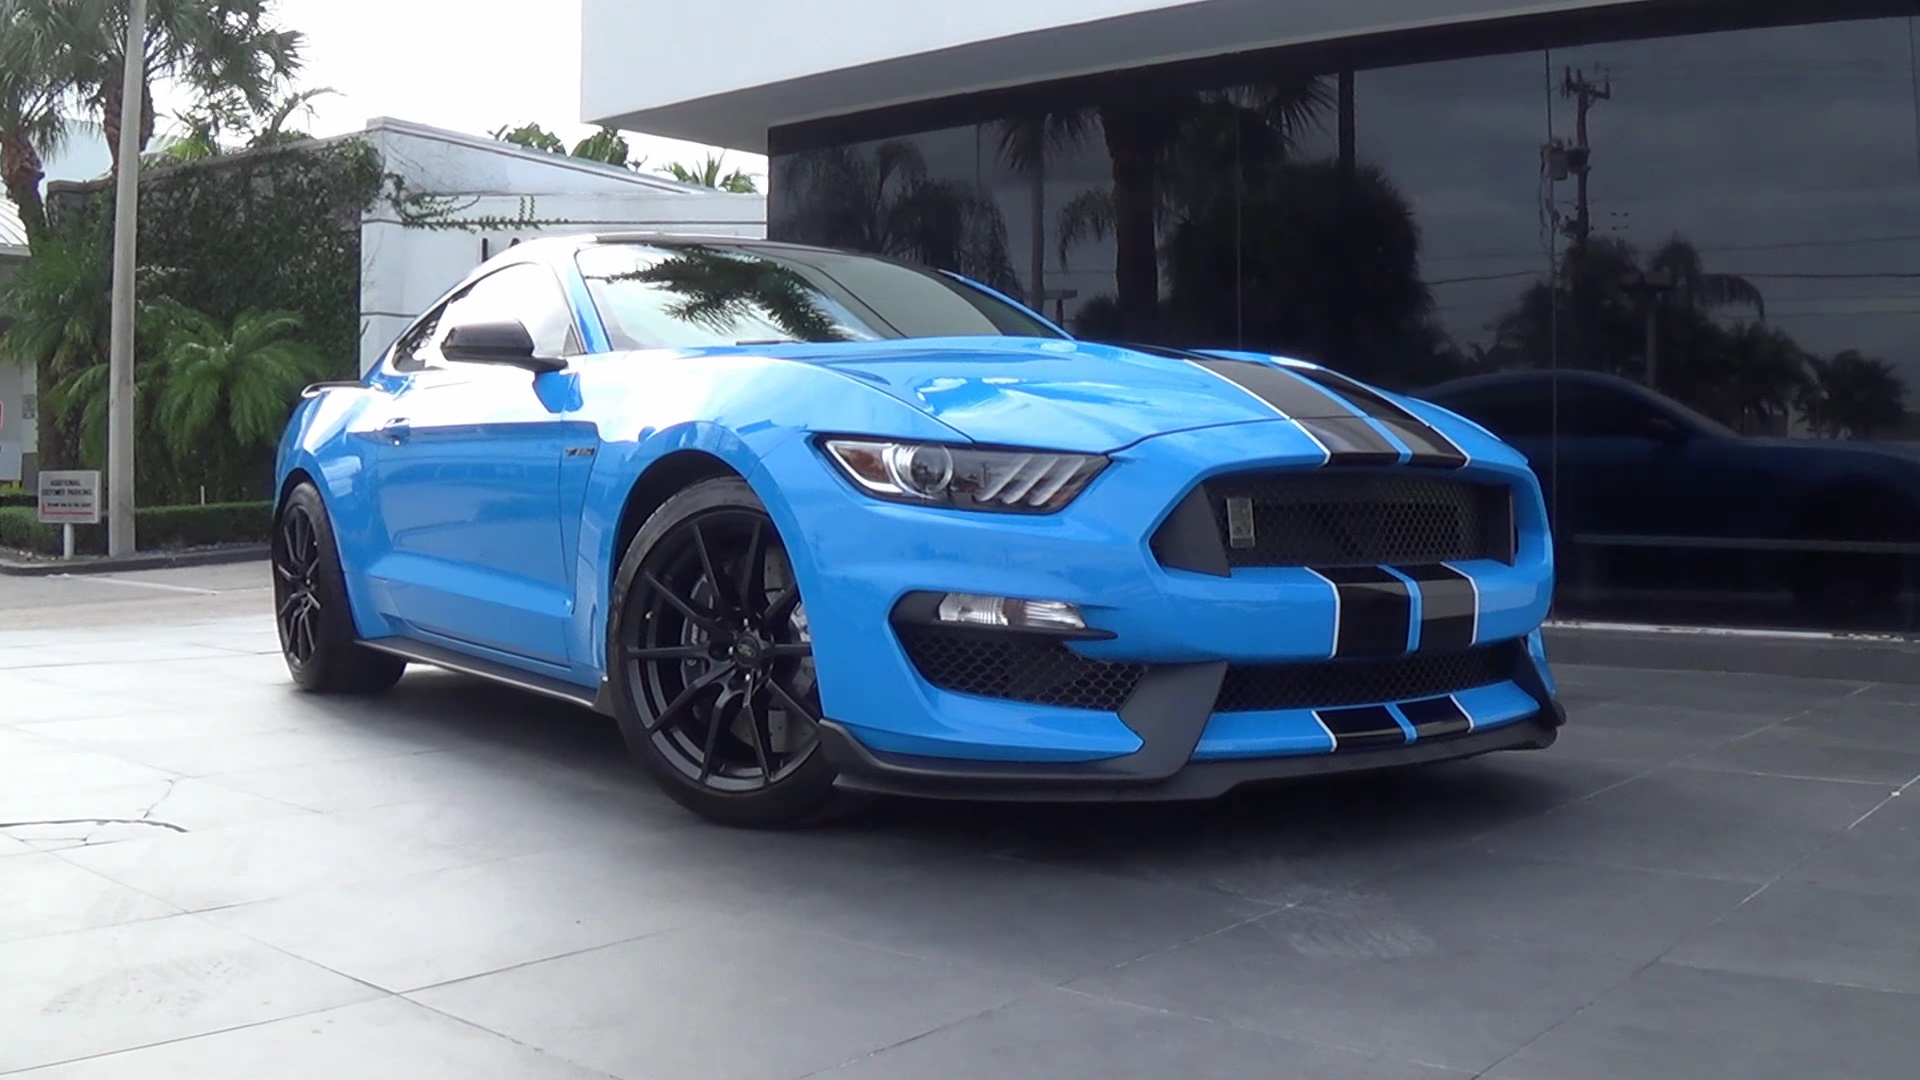 Video: 2017 Ford Mustang Shelby GT350 Loud Sound Acceleration + Full Tour